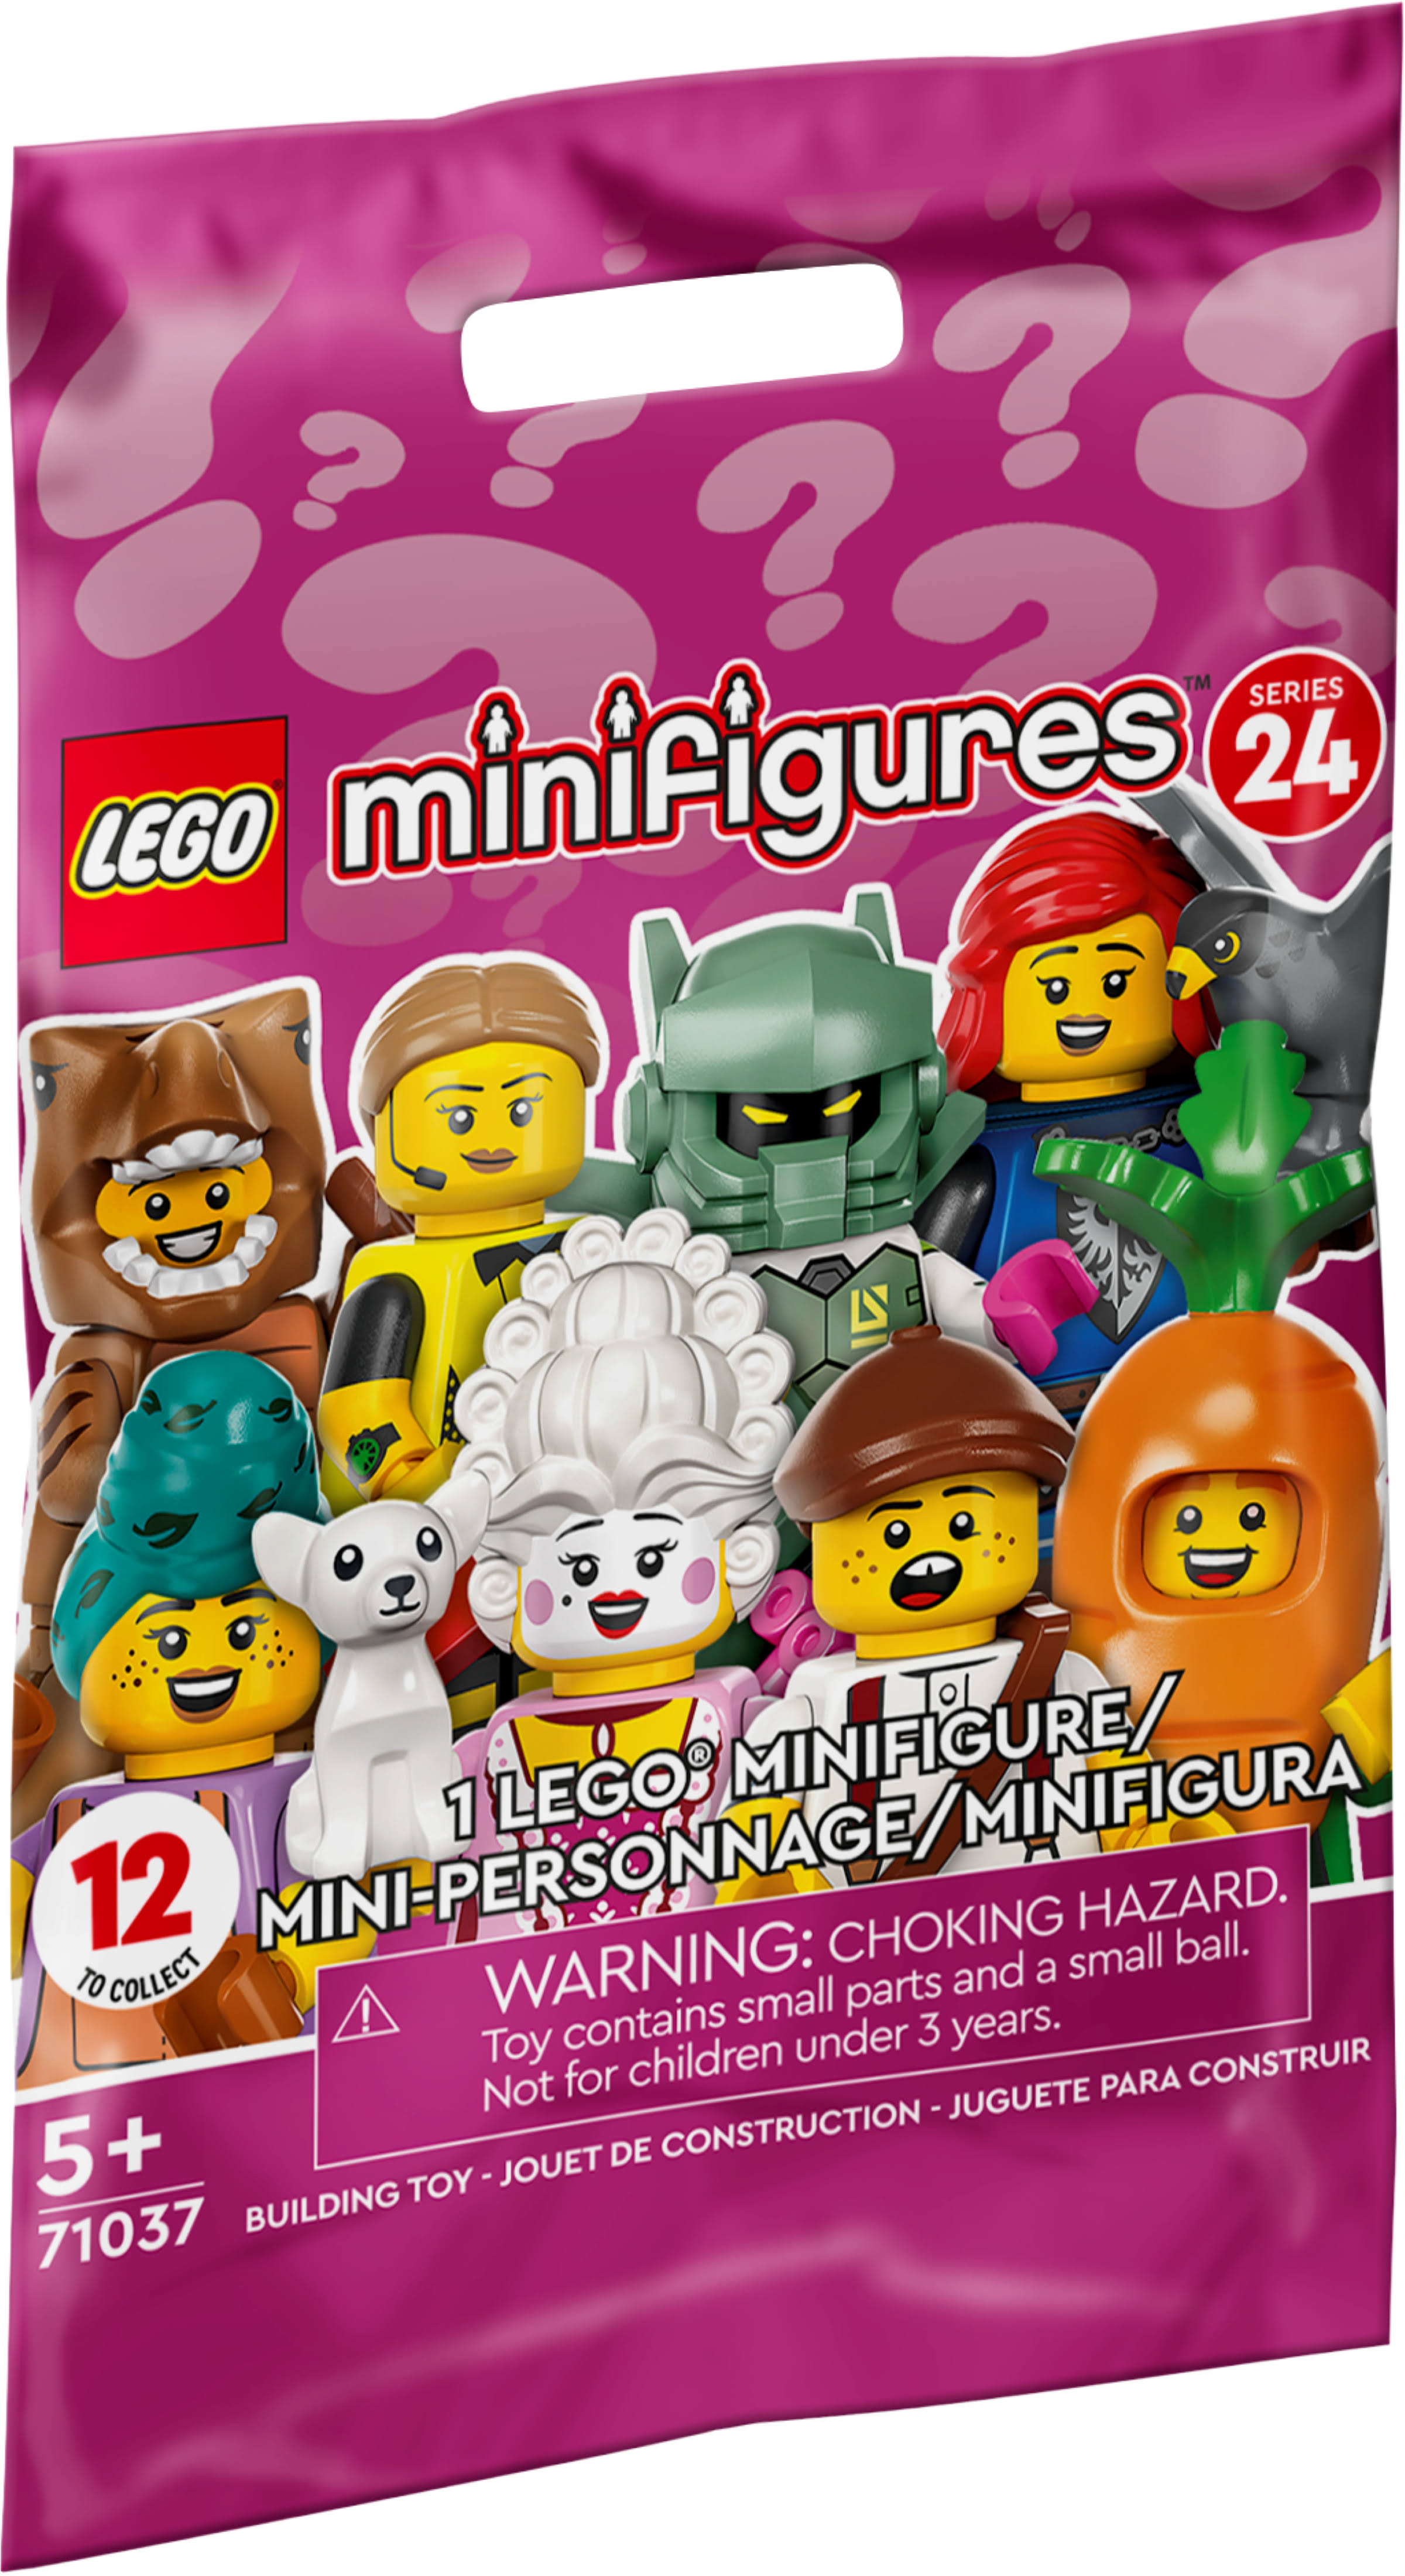 LEGO Minifigures Series 24 71037 Building Toy Set For Kids, Boys, and Girls Ages 5+ (1 of 12 to Collect)